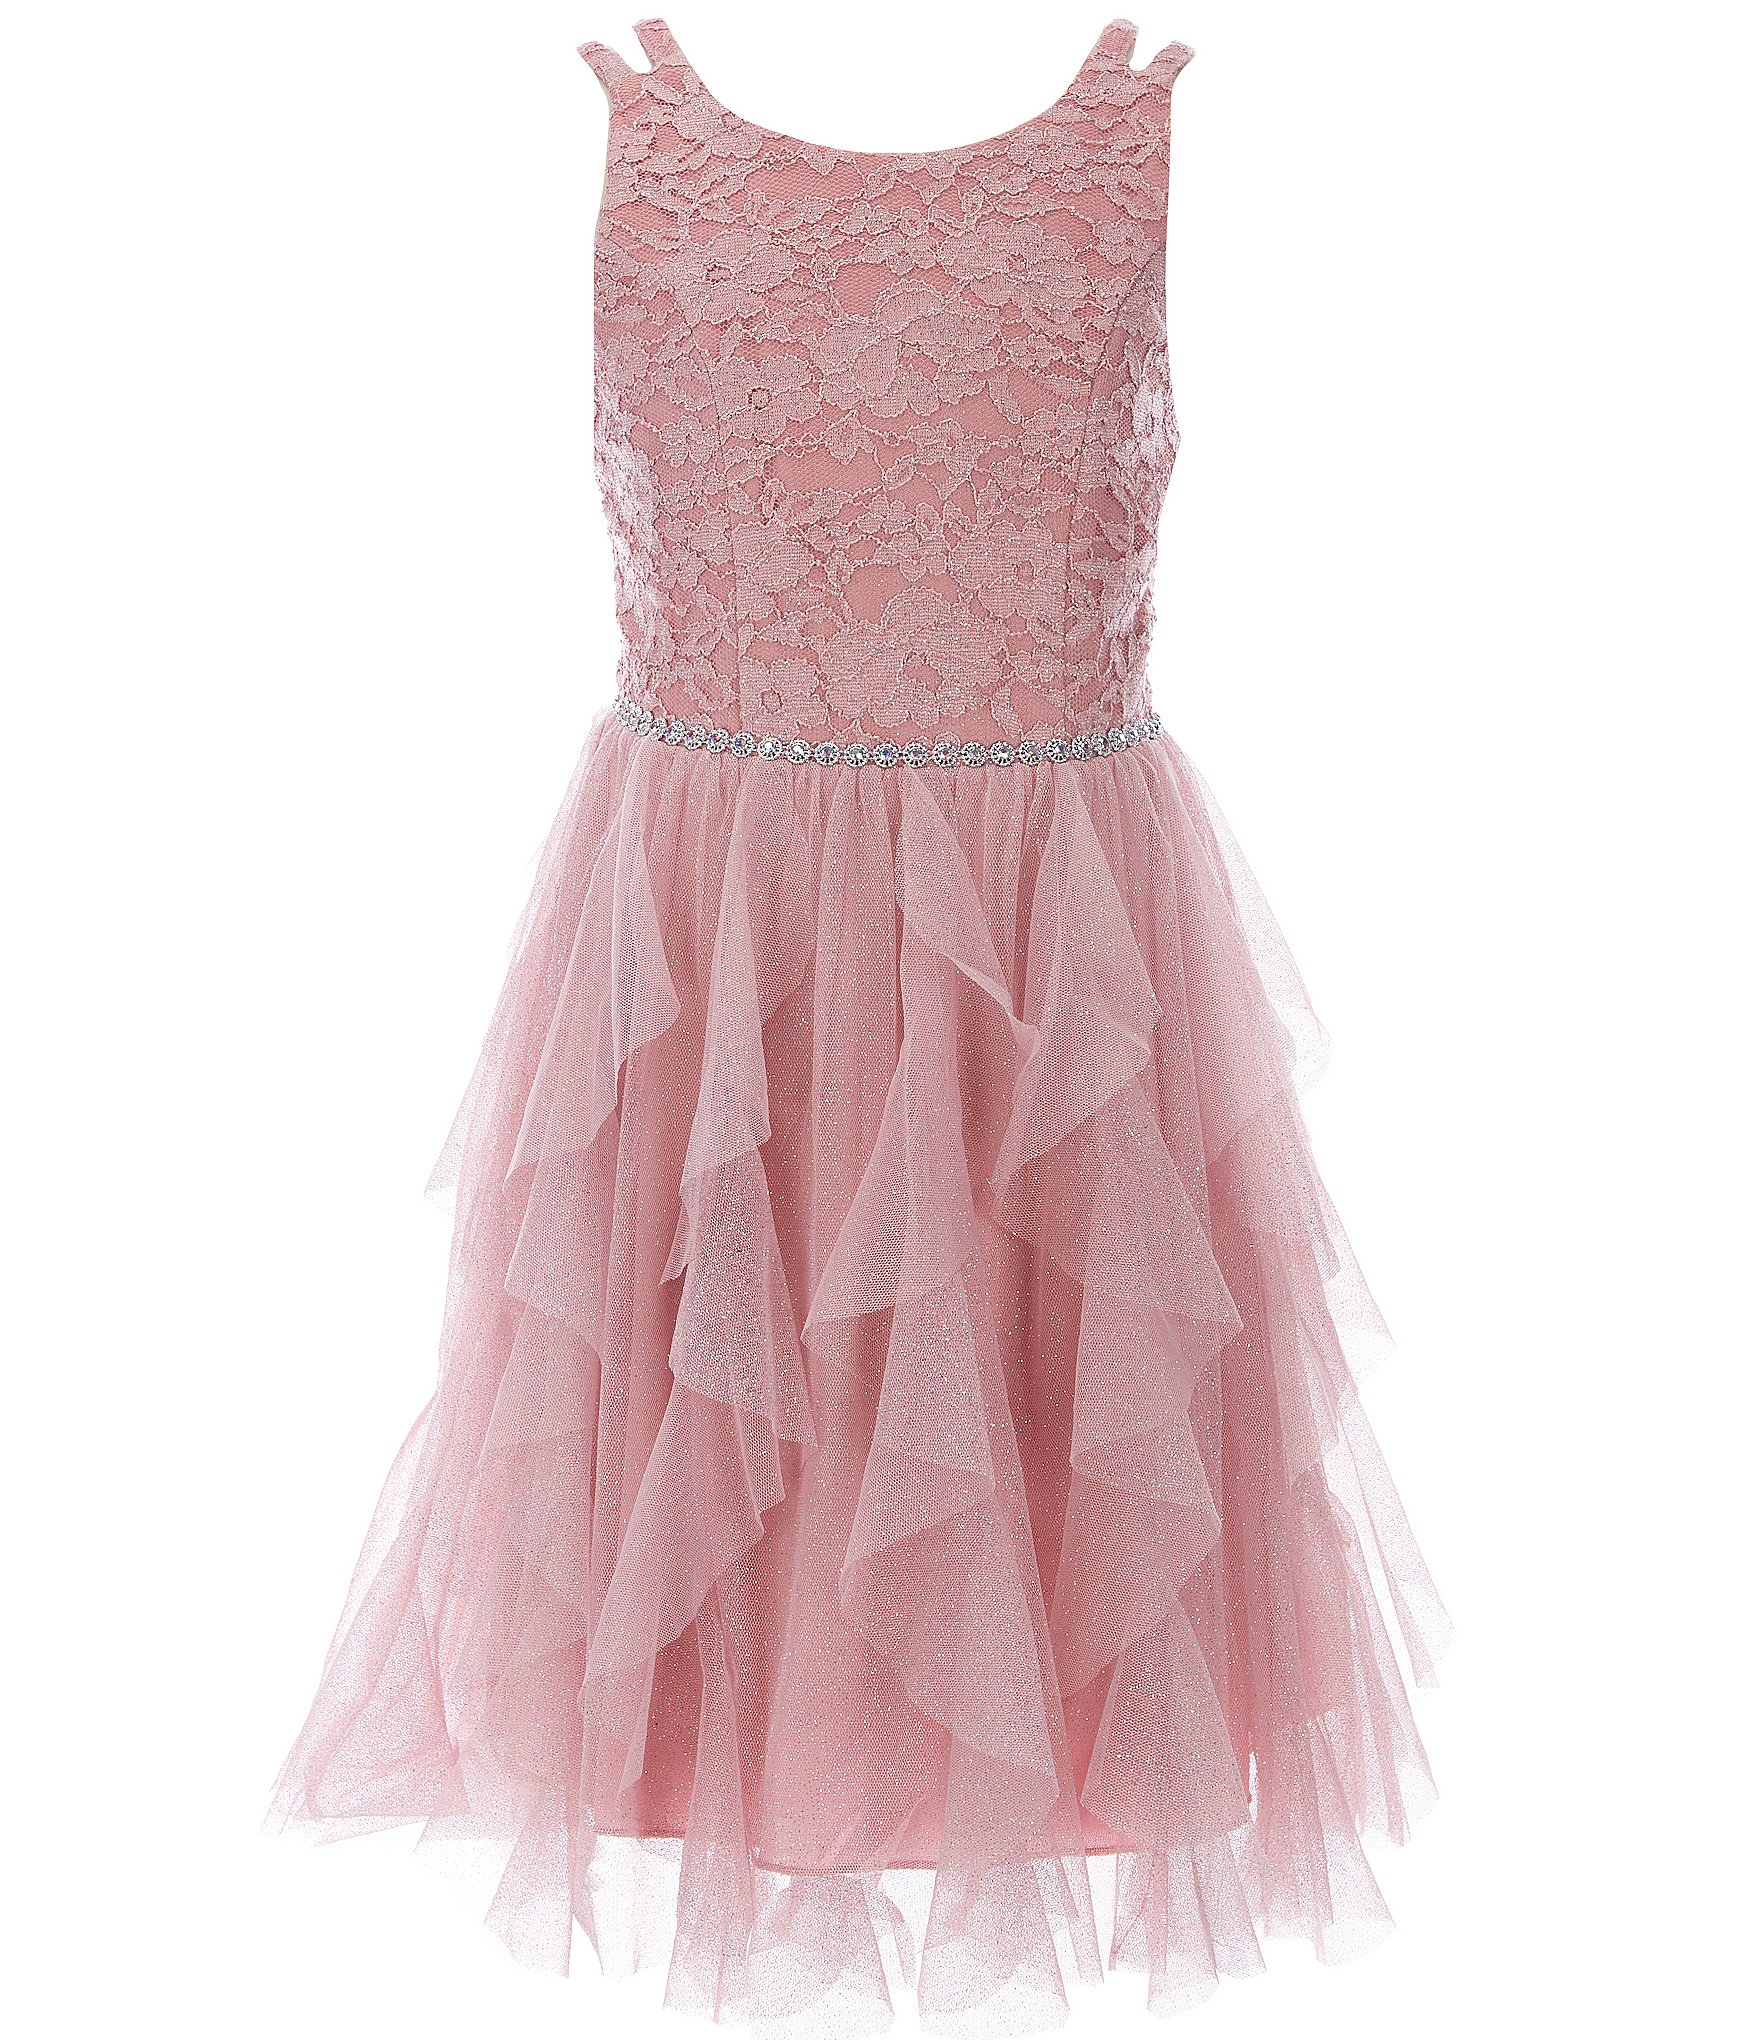 Xtraordinary Big Girls 7-16 Lace-Bodice/Corkscrew-Skirted Fit-And-Flare ...